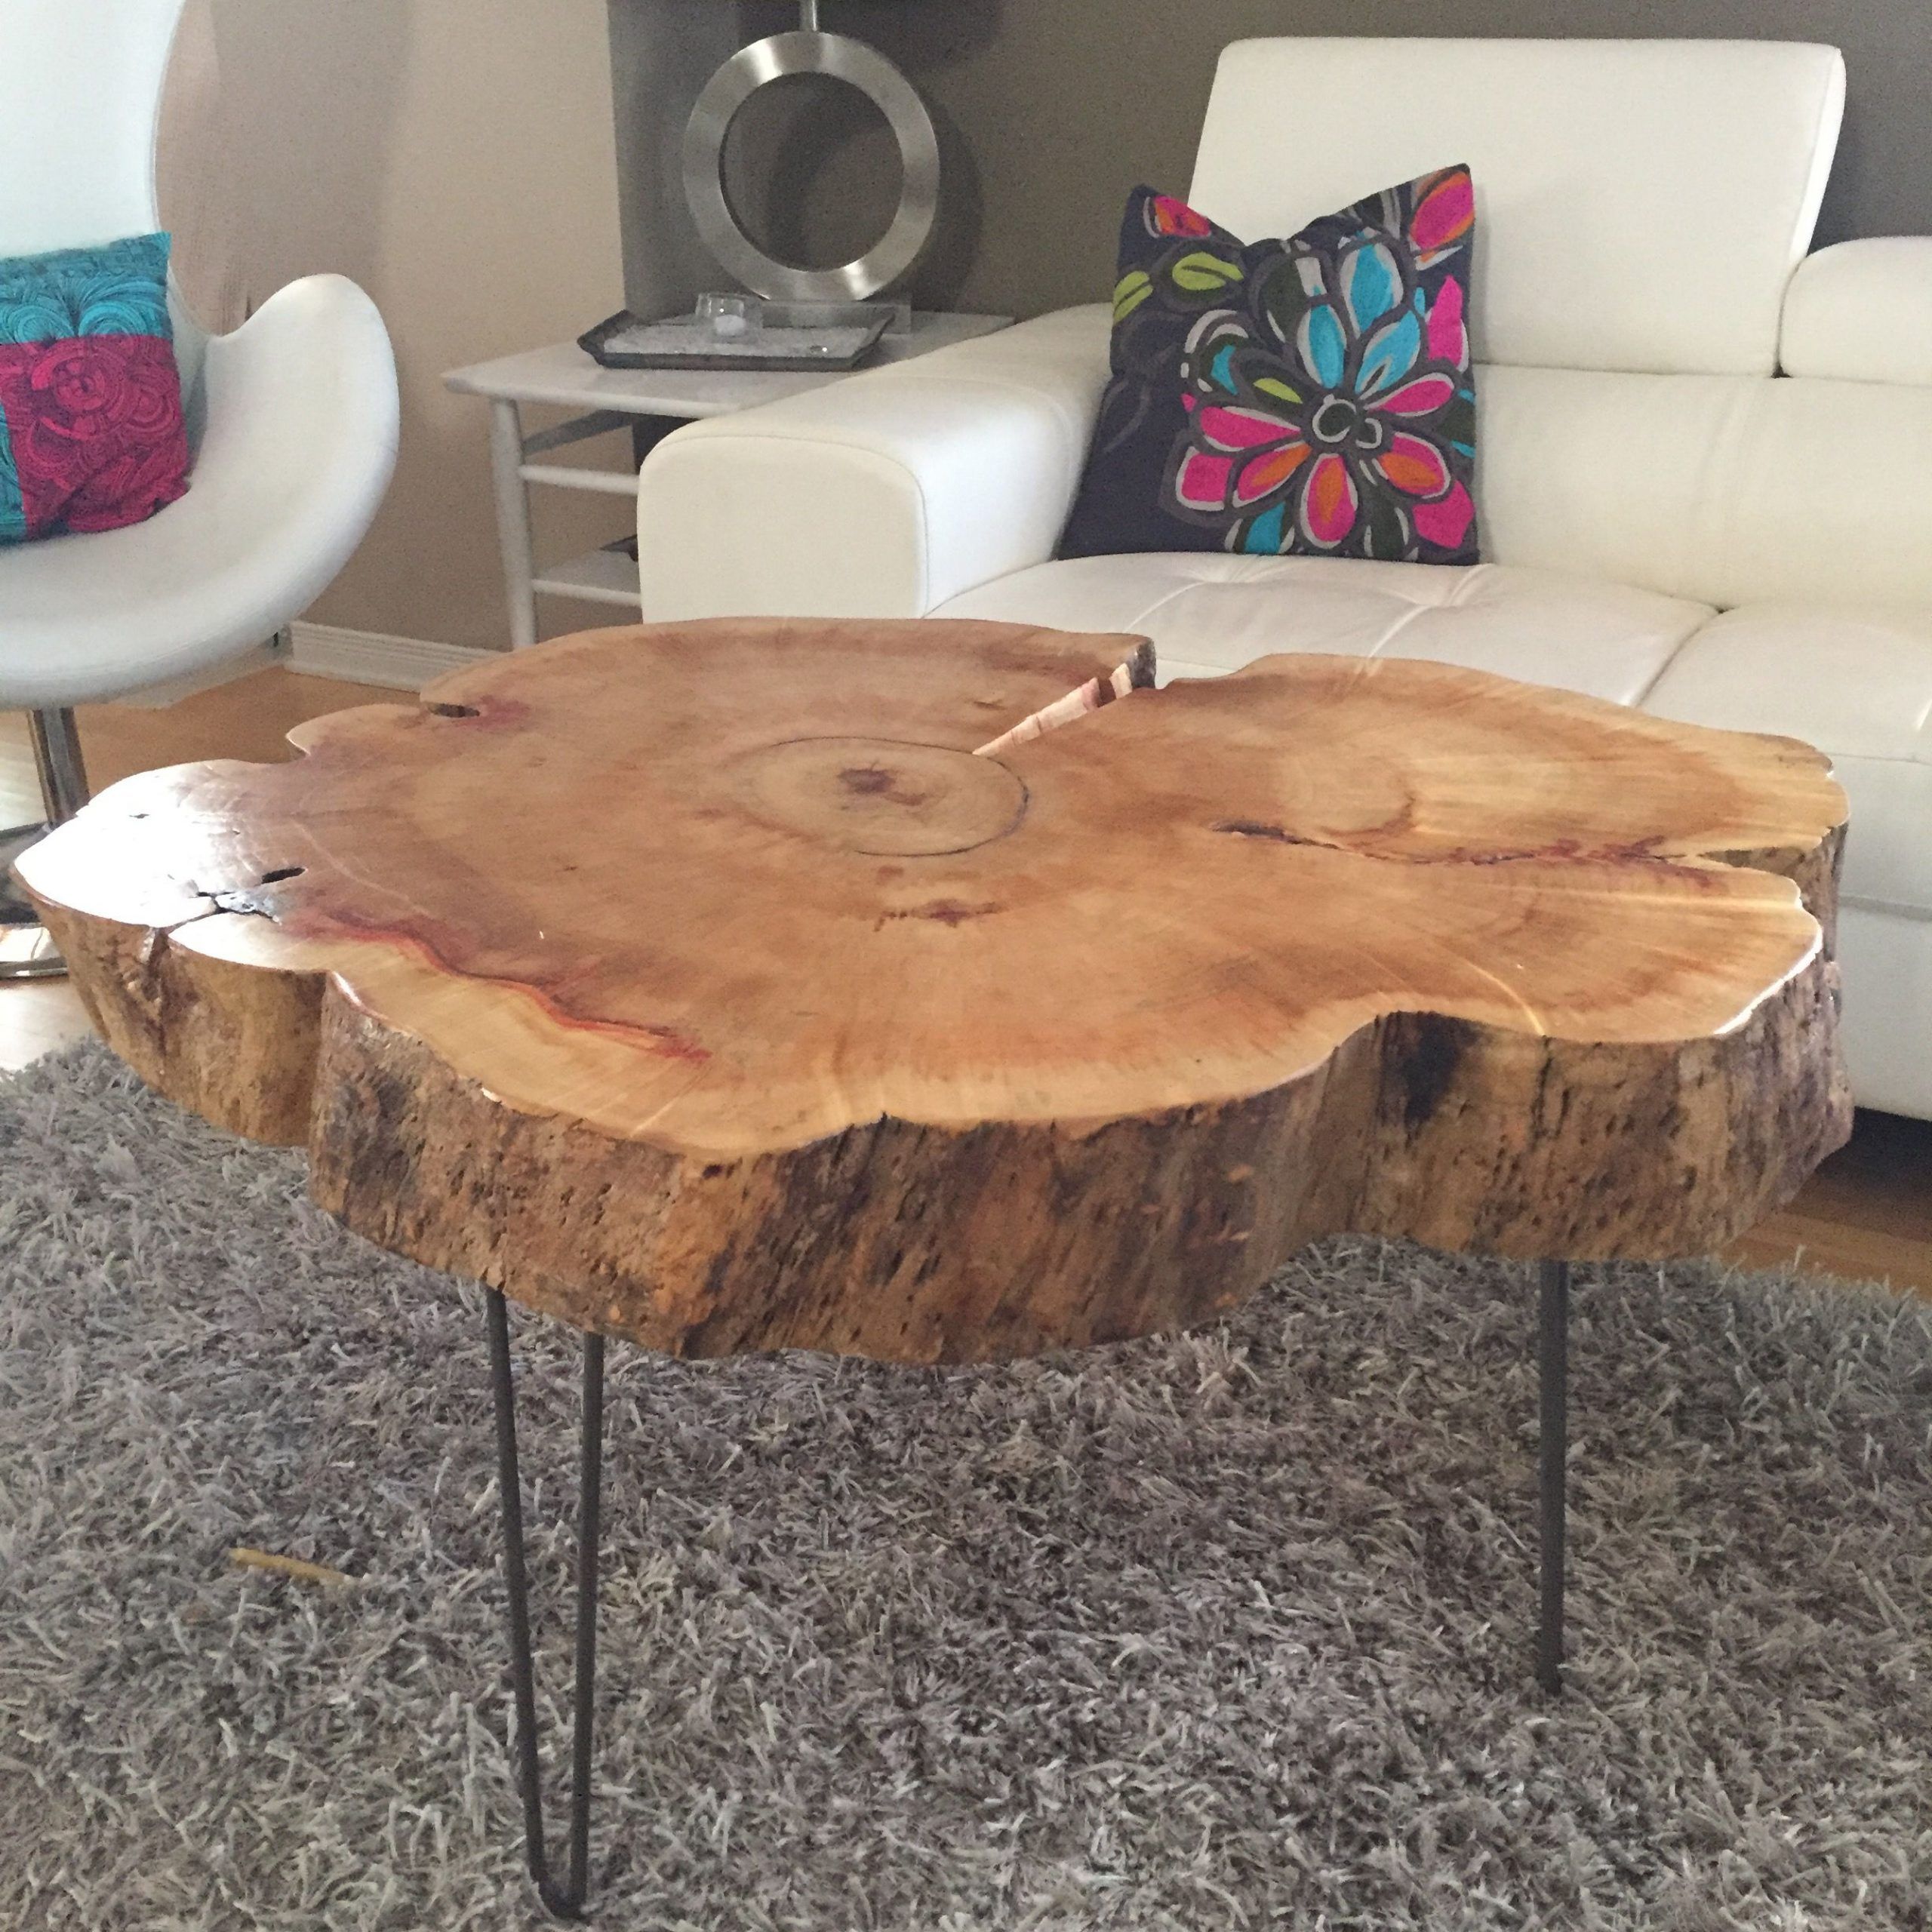 Pin On Rough Cut Build Ideas With Regard To Oak Wood And Metal Legs Coffee Tables (View 2 of 15)